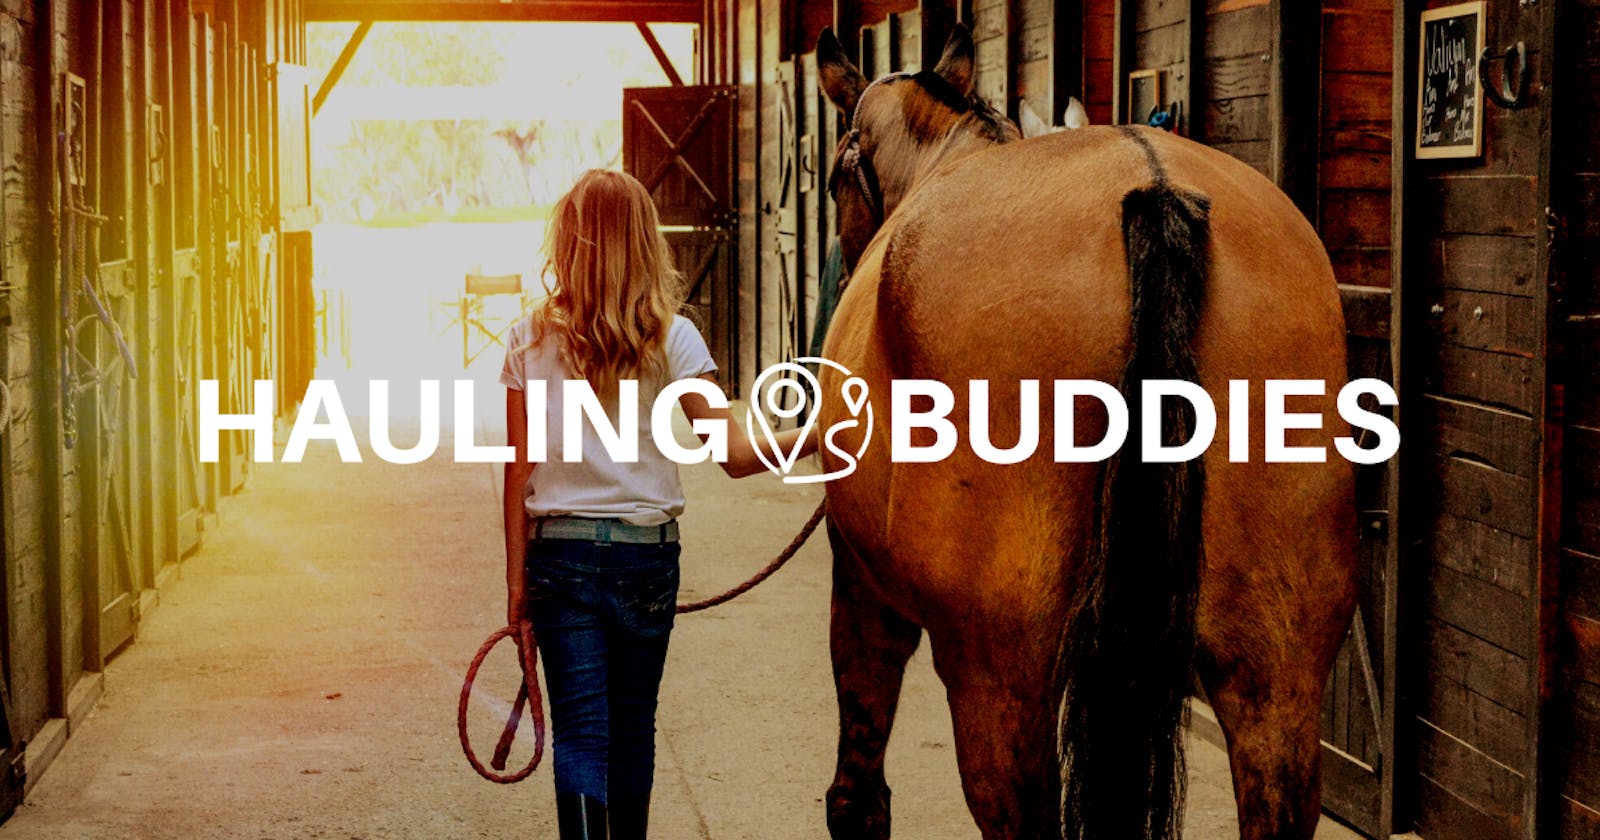 Maximizing Your Sales as an Animal Breeder: How Hauling Buddies Can Help You Find Reliable Transport for Your Clients